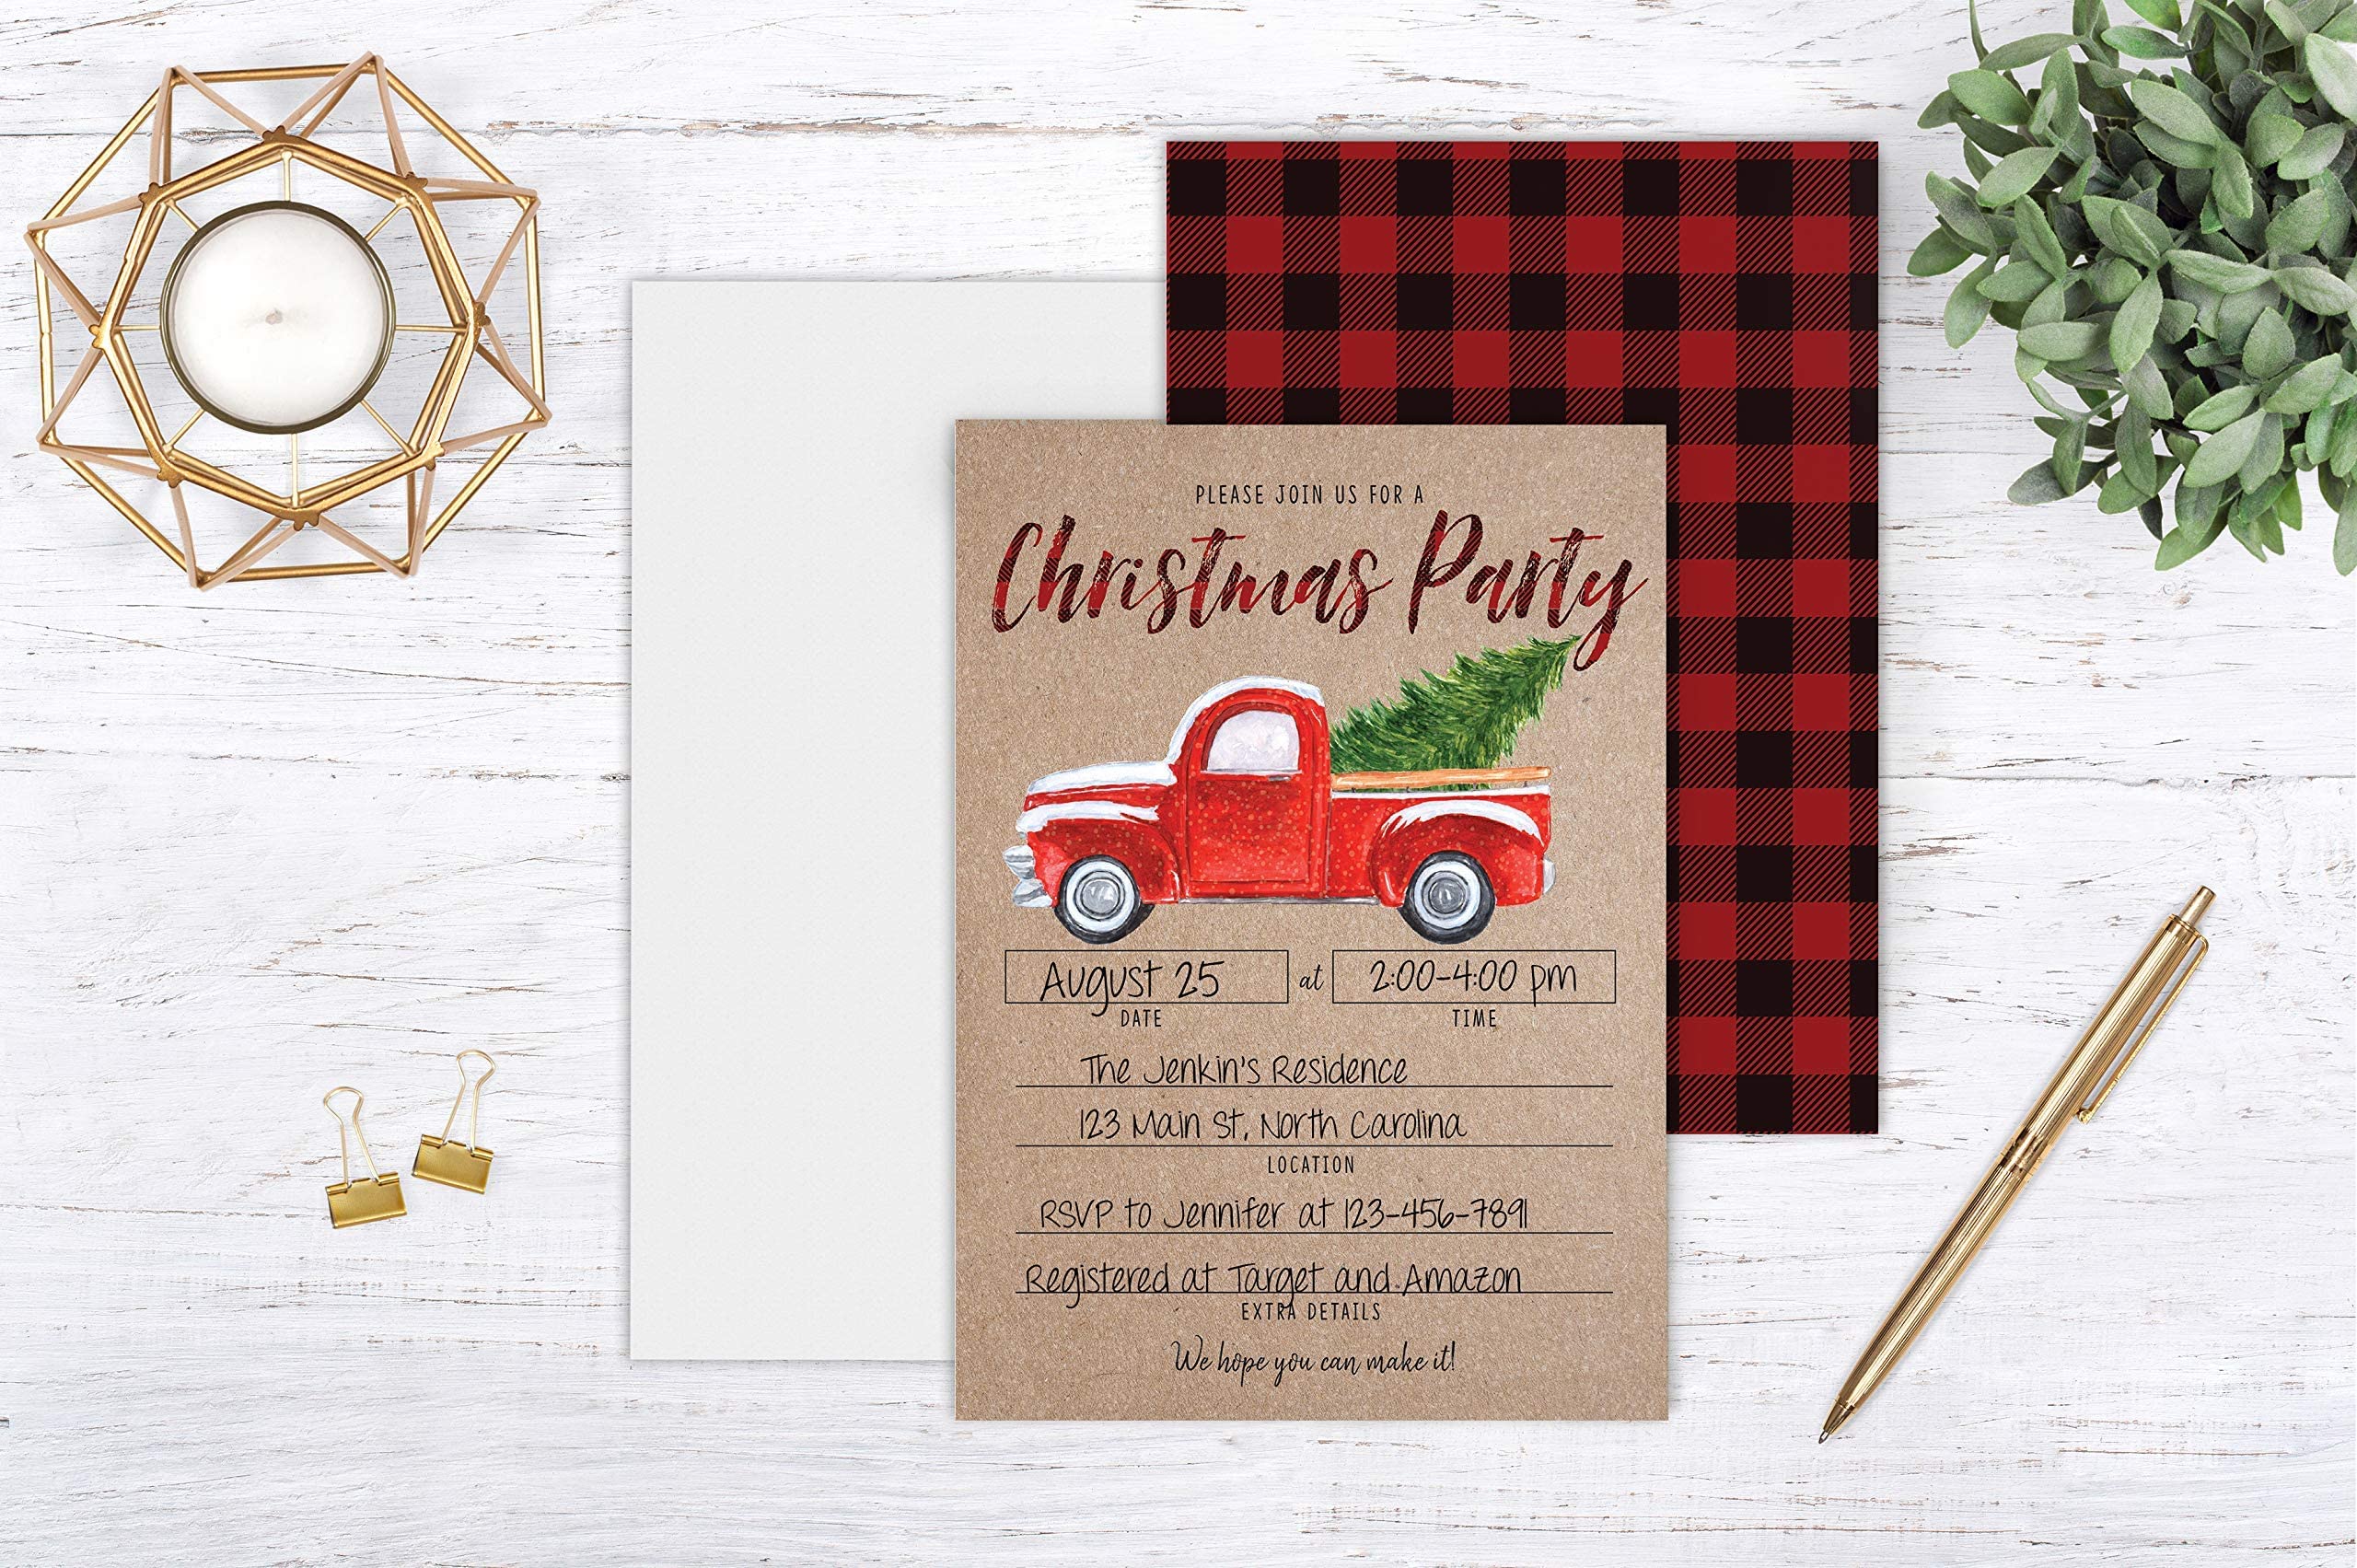 Your Main Event Prints Rustic Christmas Party Invitation with Red Truck and Christmas Tree, Holiday Party Invite, Christmas Party, Holiday Party Invitations, 20 Fill in Invitations and Envelopes